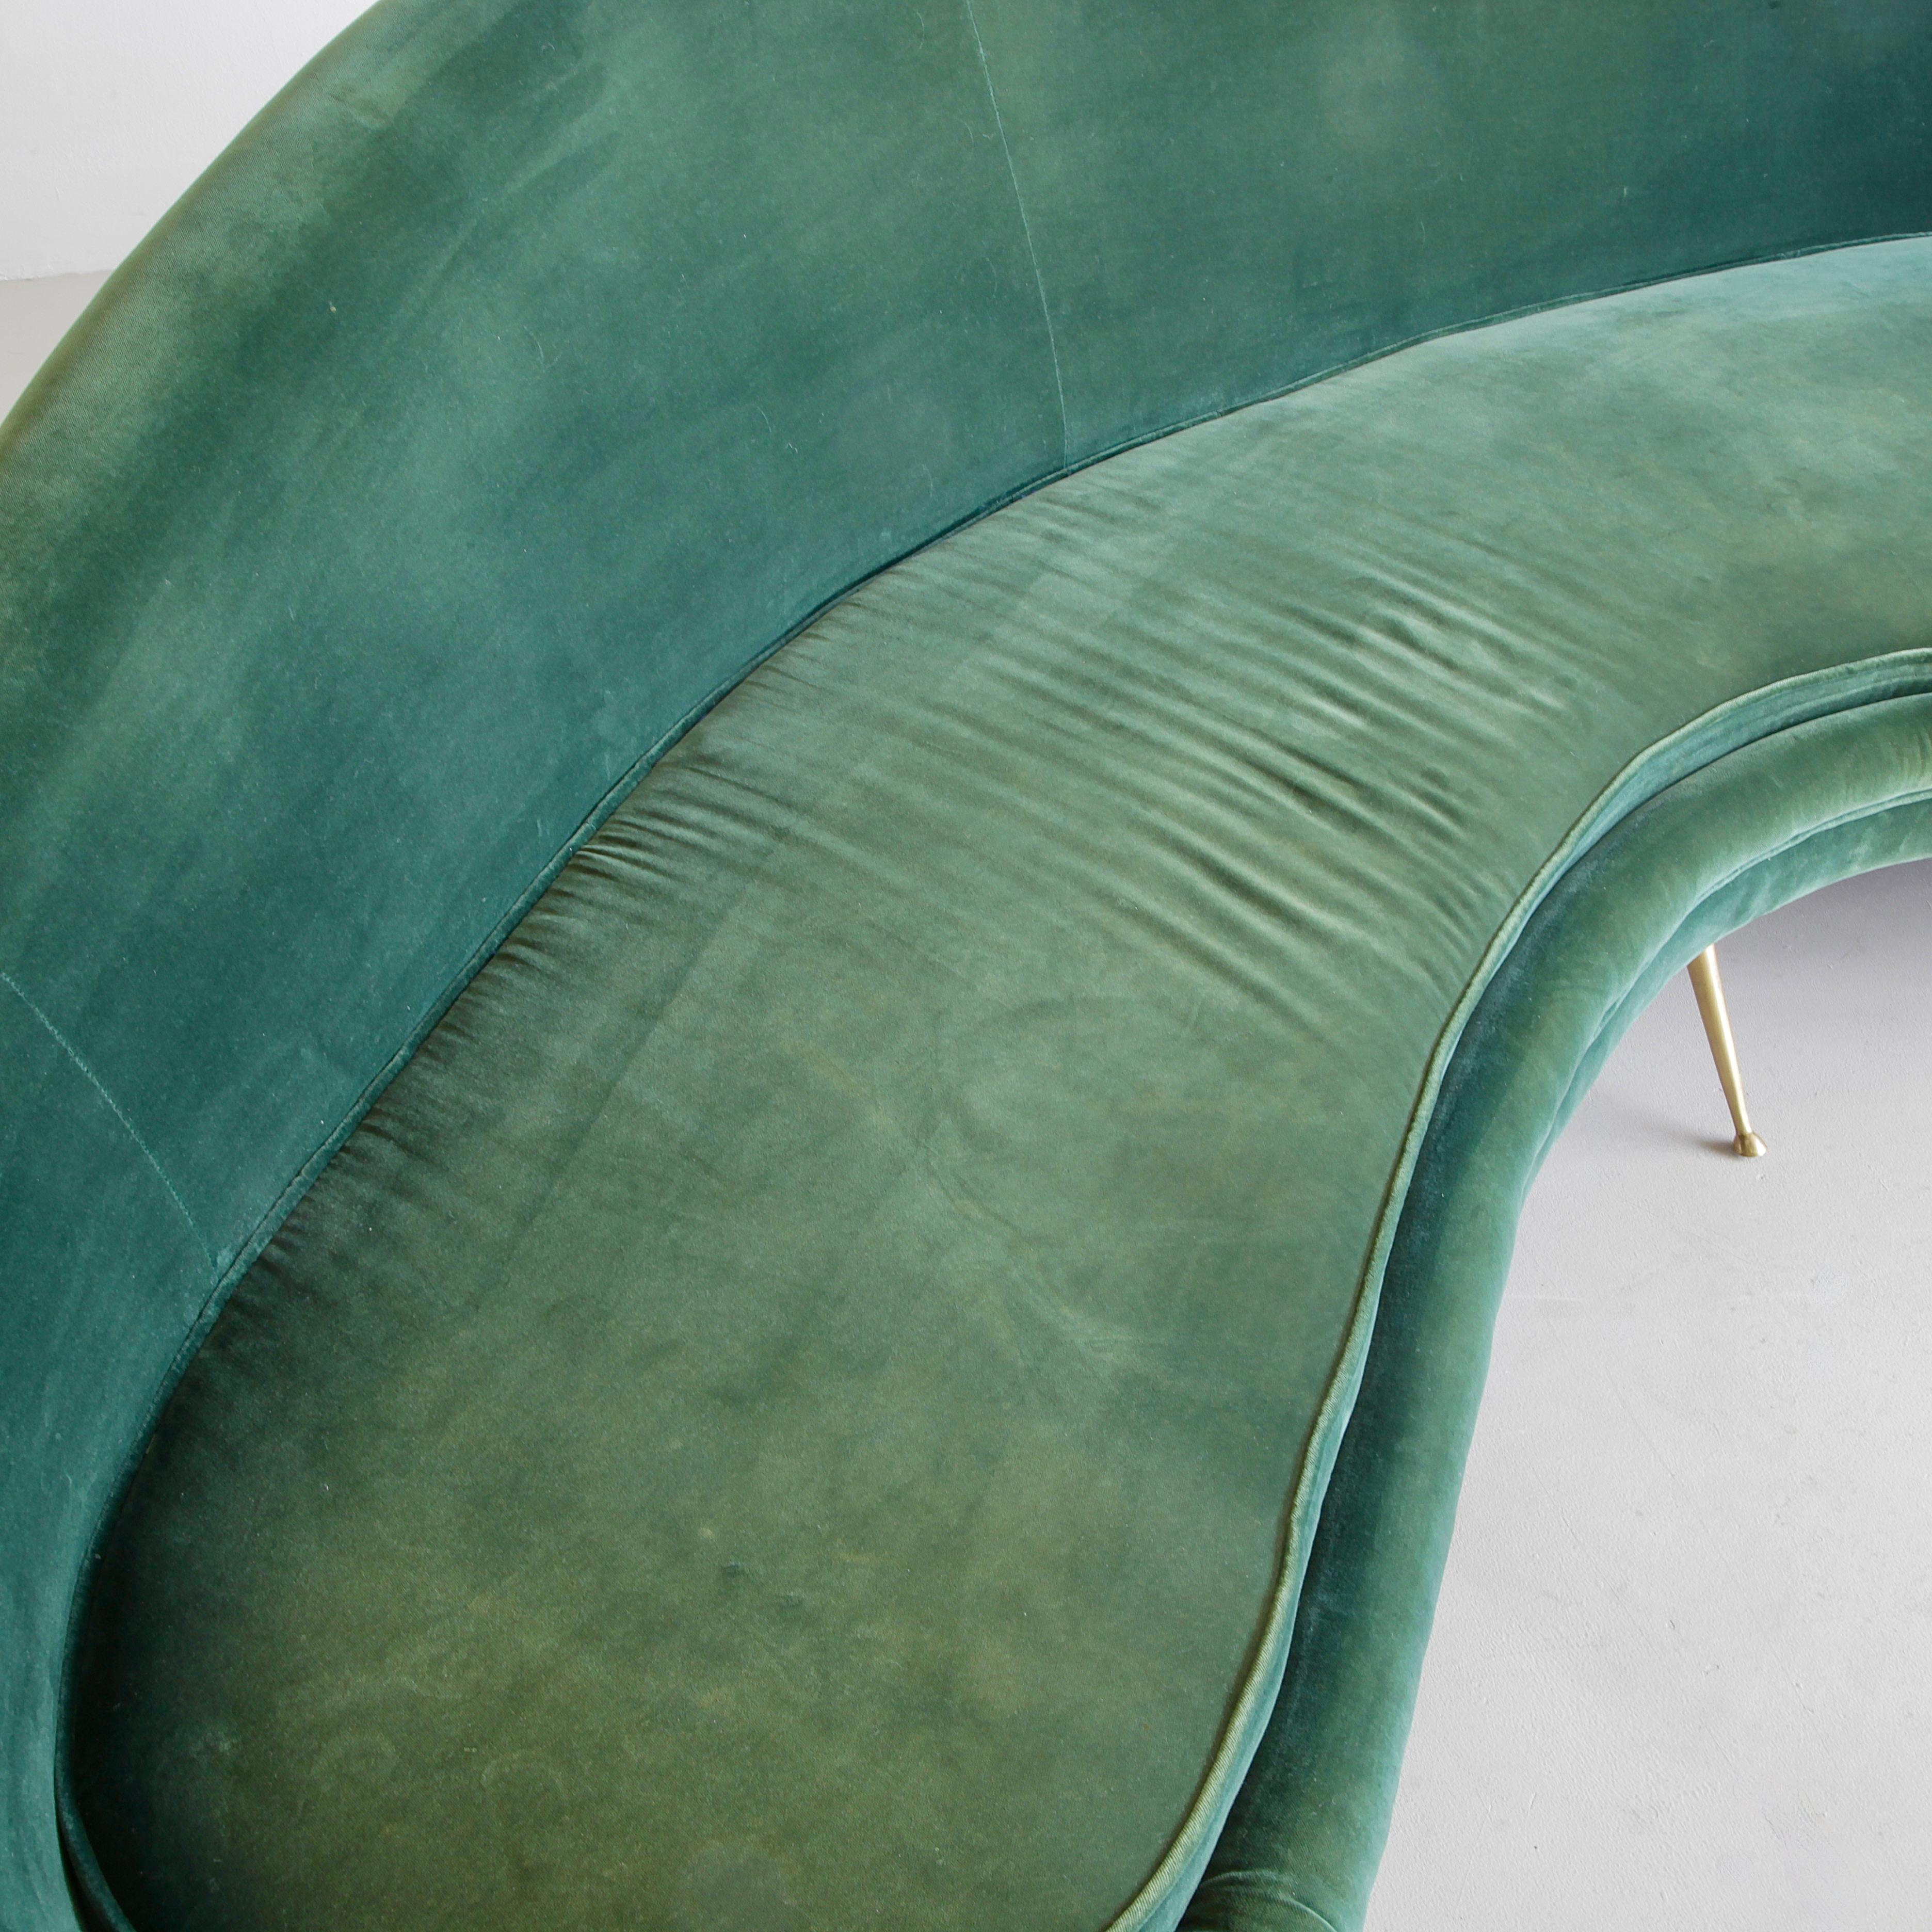 Curved Sofa in the style of Ico Parisi. Italy, 21st C.

A large curved sofa with beautifully shaped back and side rests. Upholstered in green velvet material and sitting on six brass legs.
Condition: 

Excellent vintage condition with minor